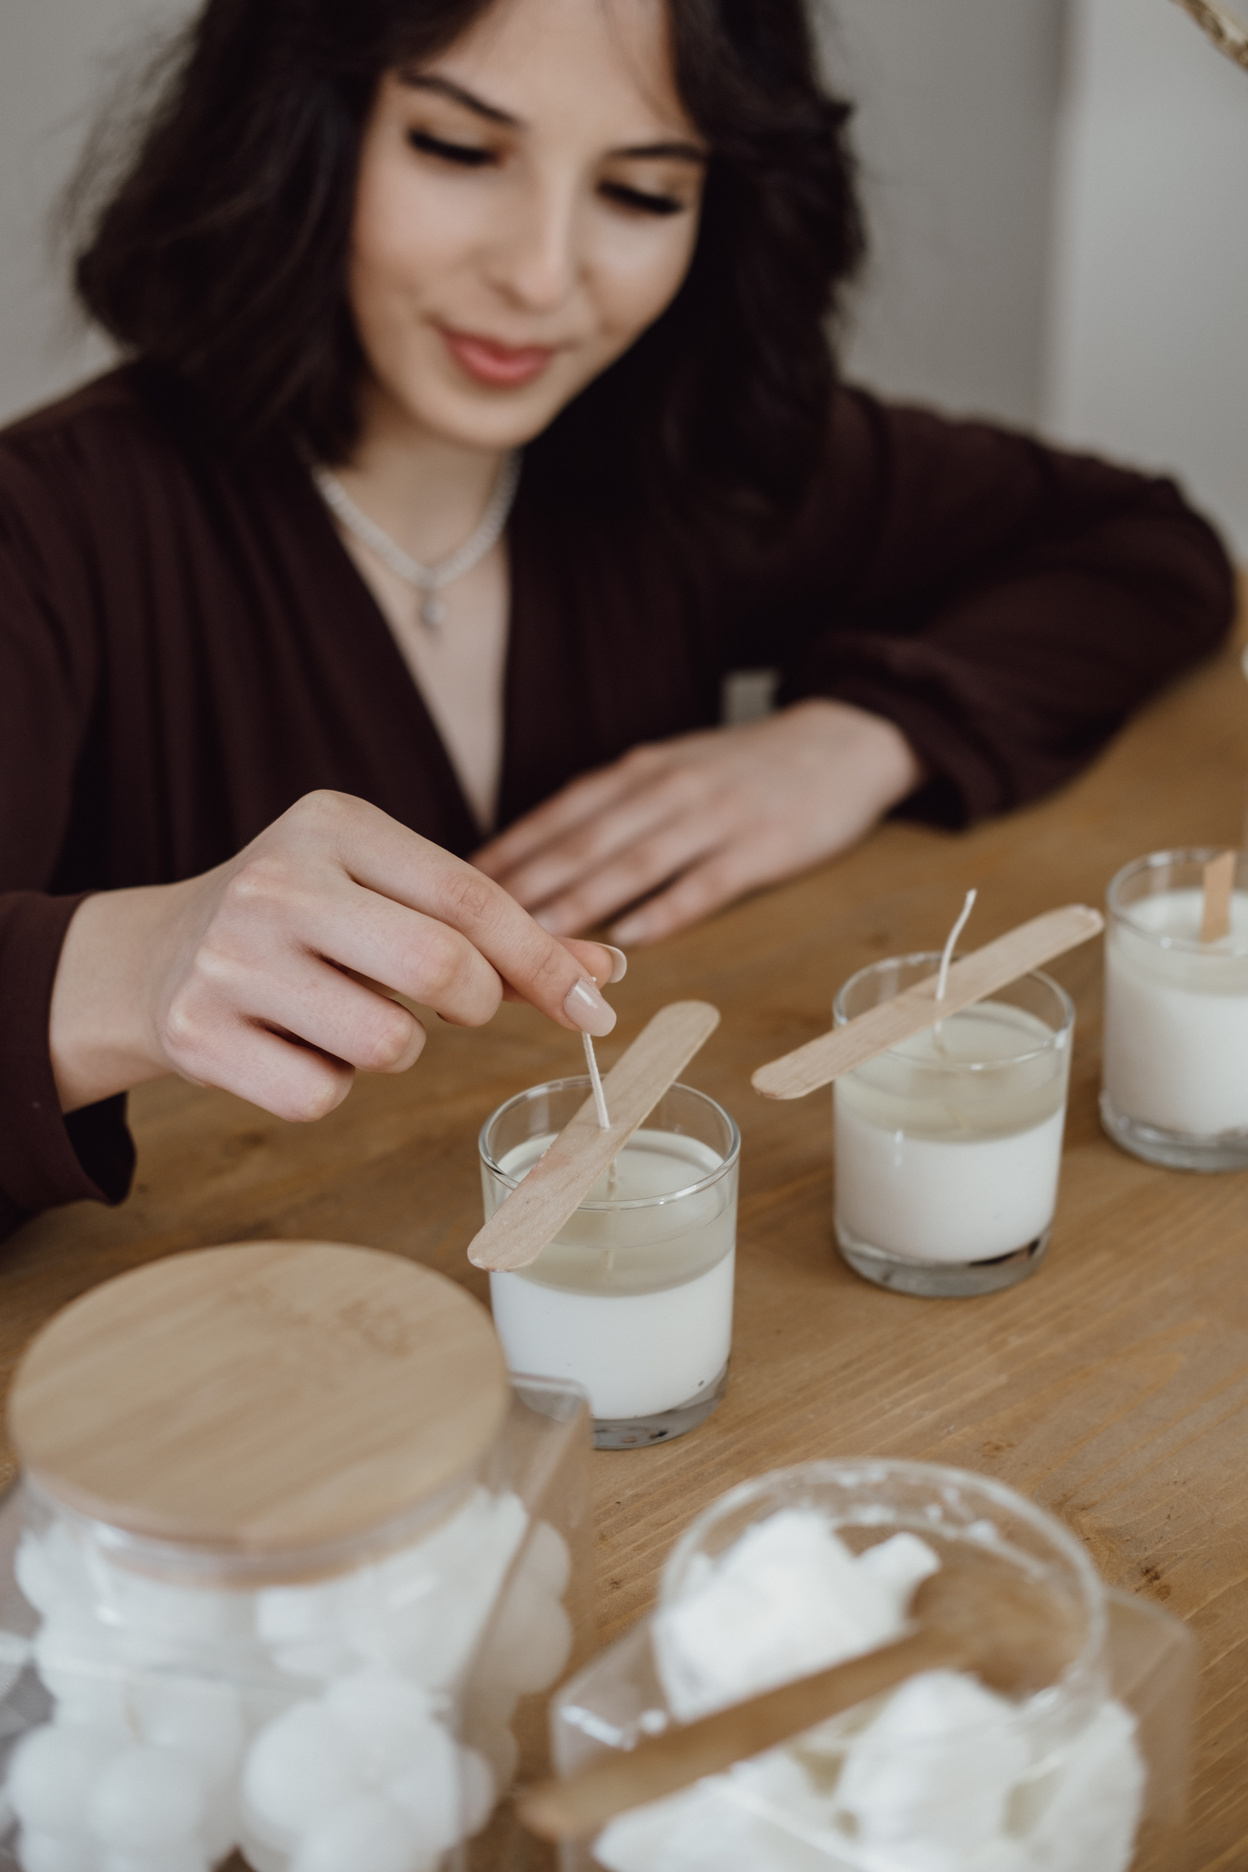 Young Woman Making Homemade Scented Candles